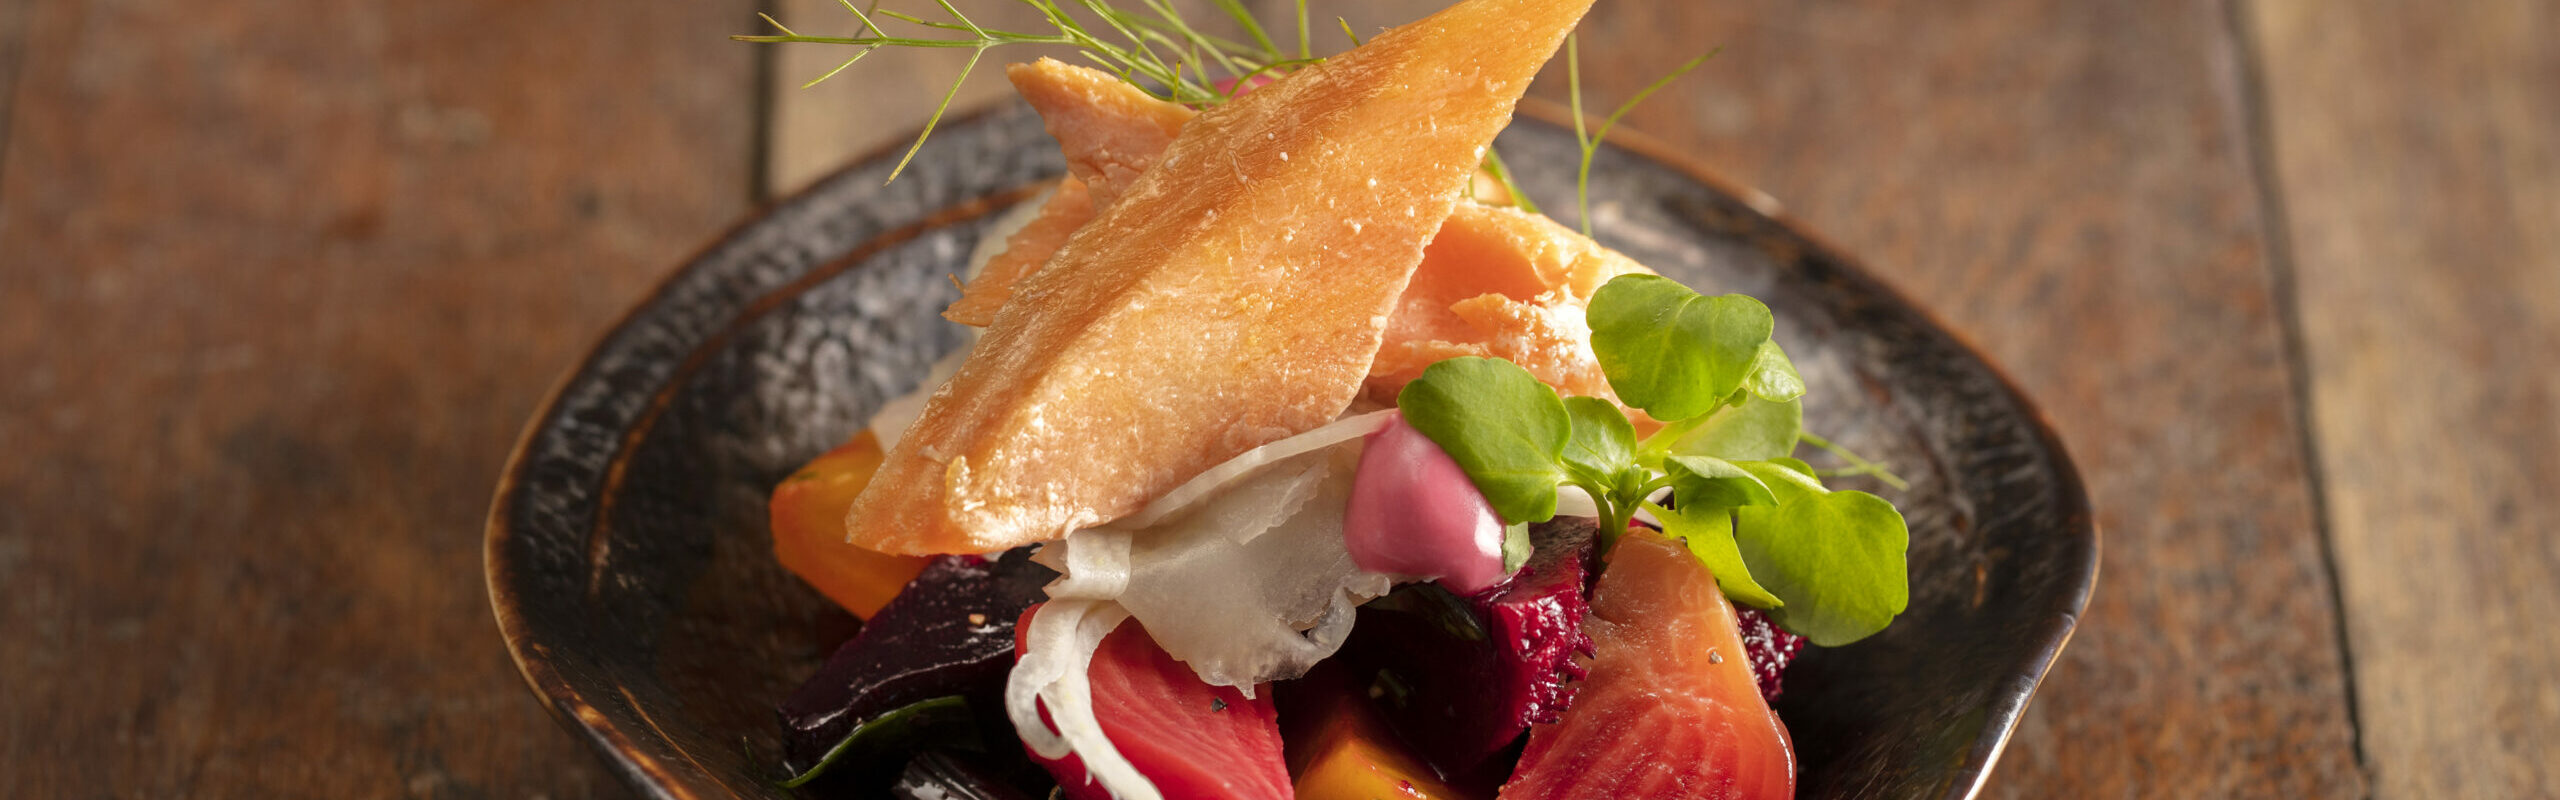 Hot smoked Chalk Stream trout, heritage beetroot, shaved fennel, beetroot emulsion, baby watercress (c)